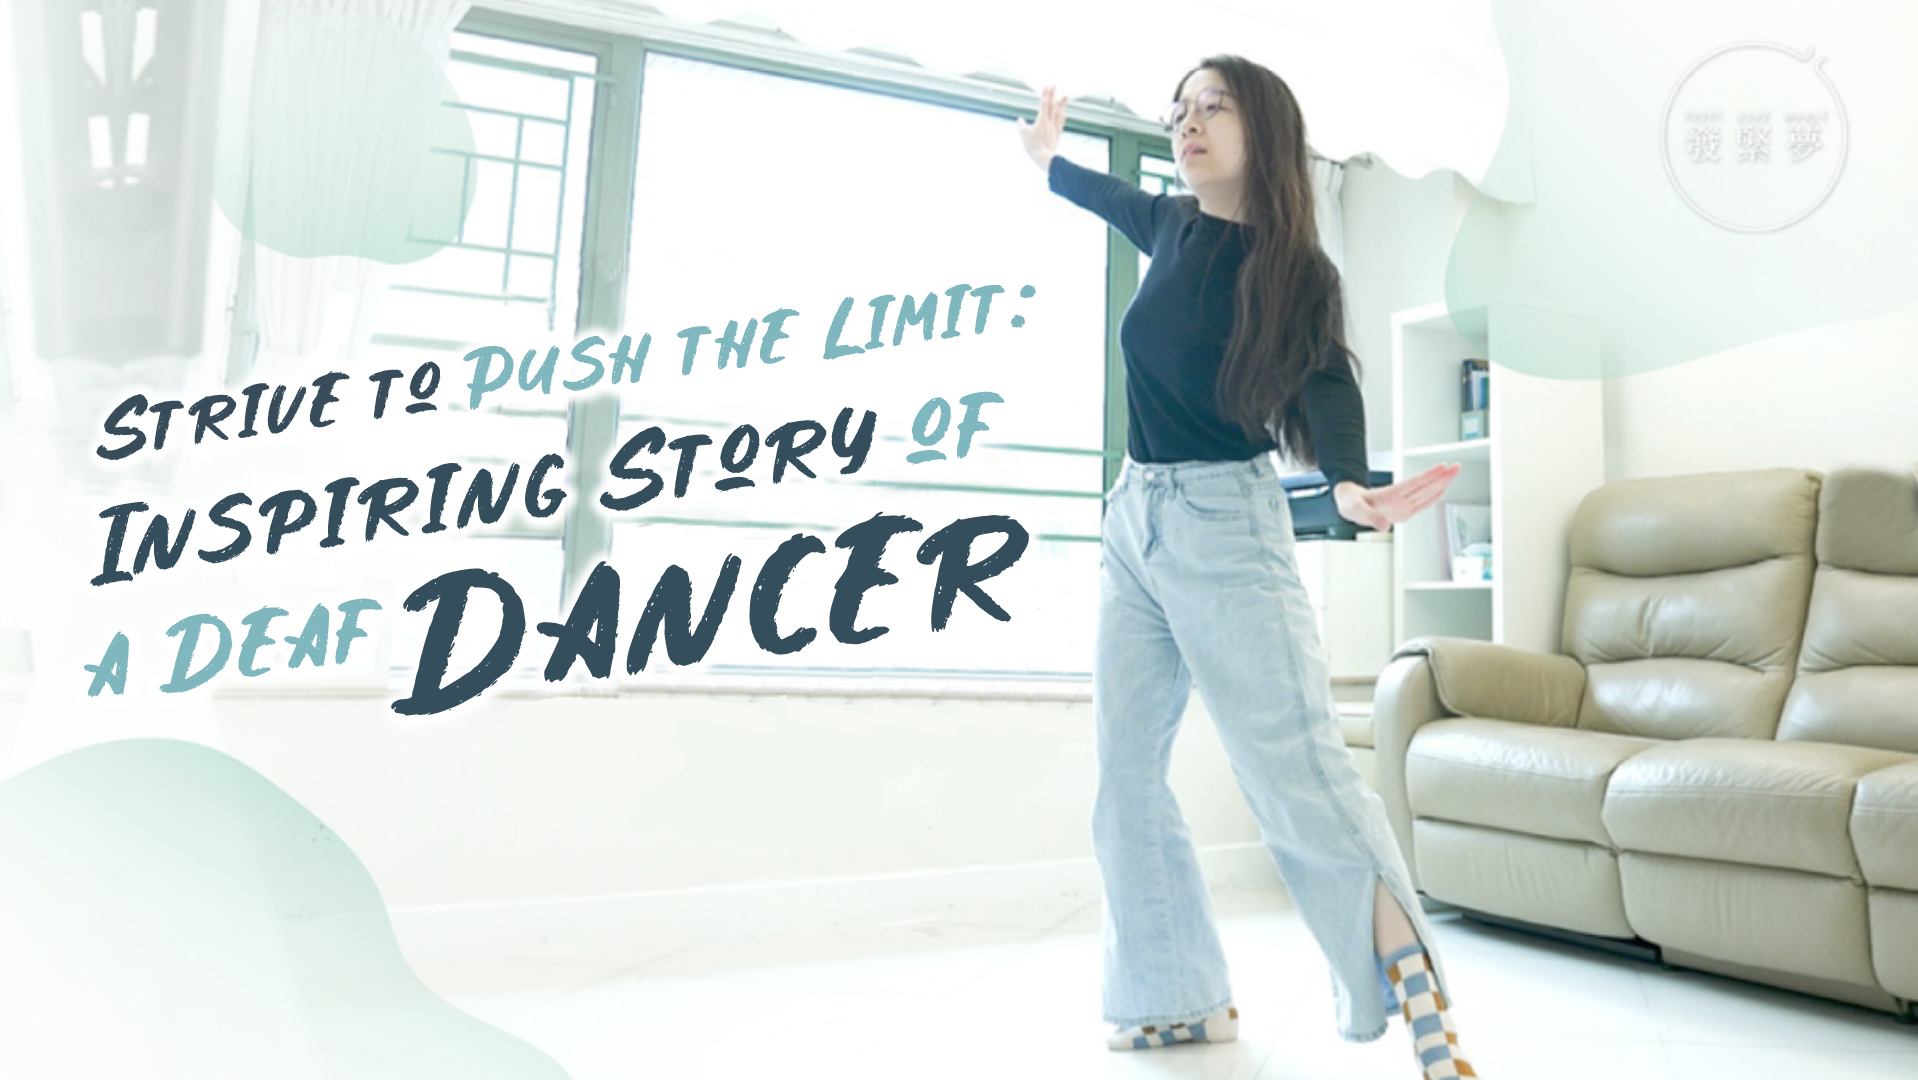 Exclusive｜Strive to Push the Limit: Inspiring Story of a Deaf Dancer